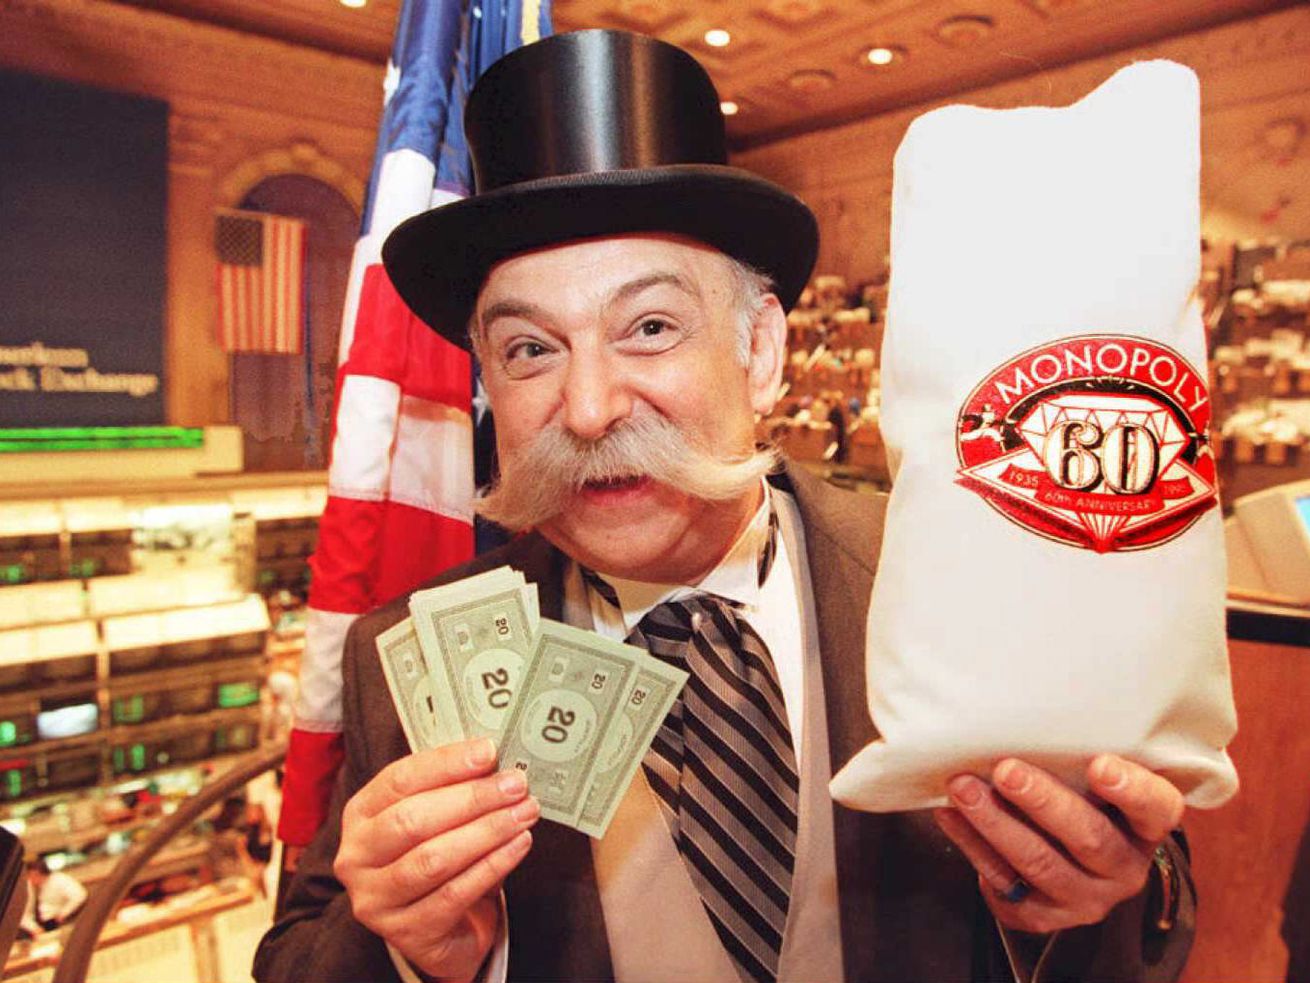 A person dressed up as Mr. Monopoly, holding up Monopoly money and a money bag commemorating the 60th anniversary of the game.